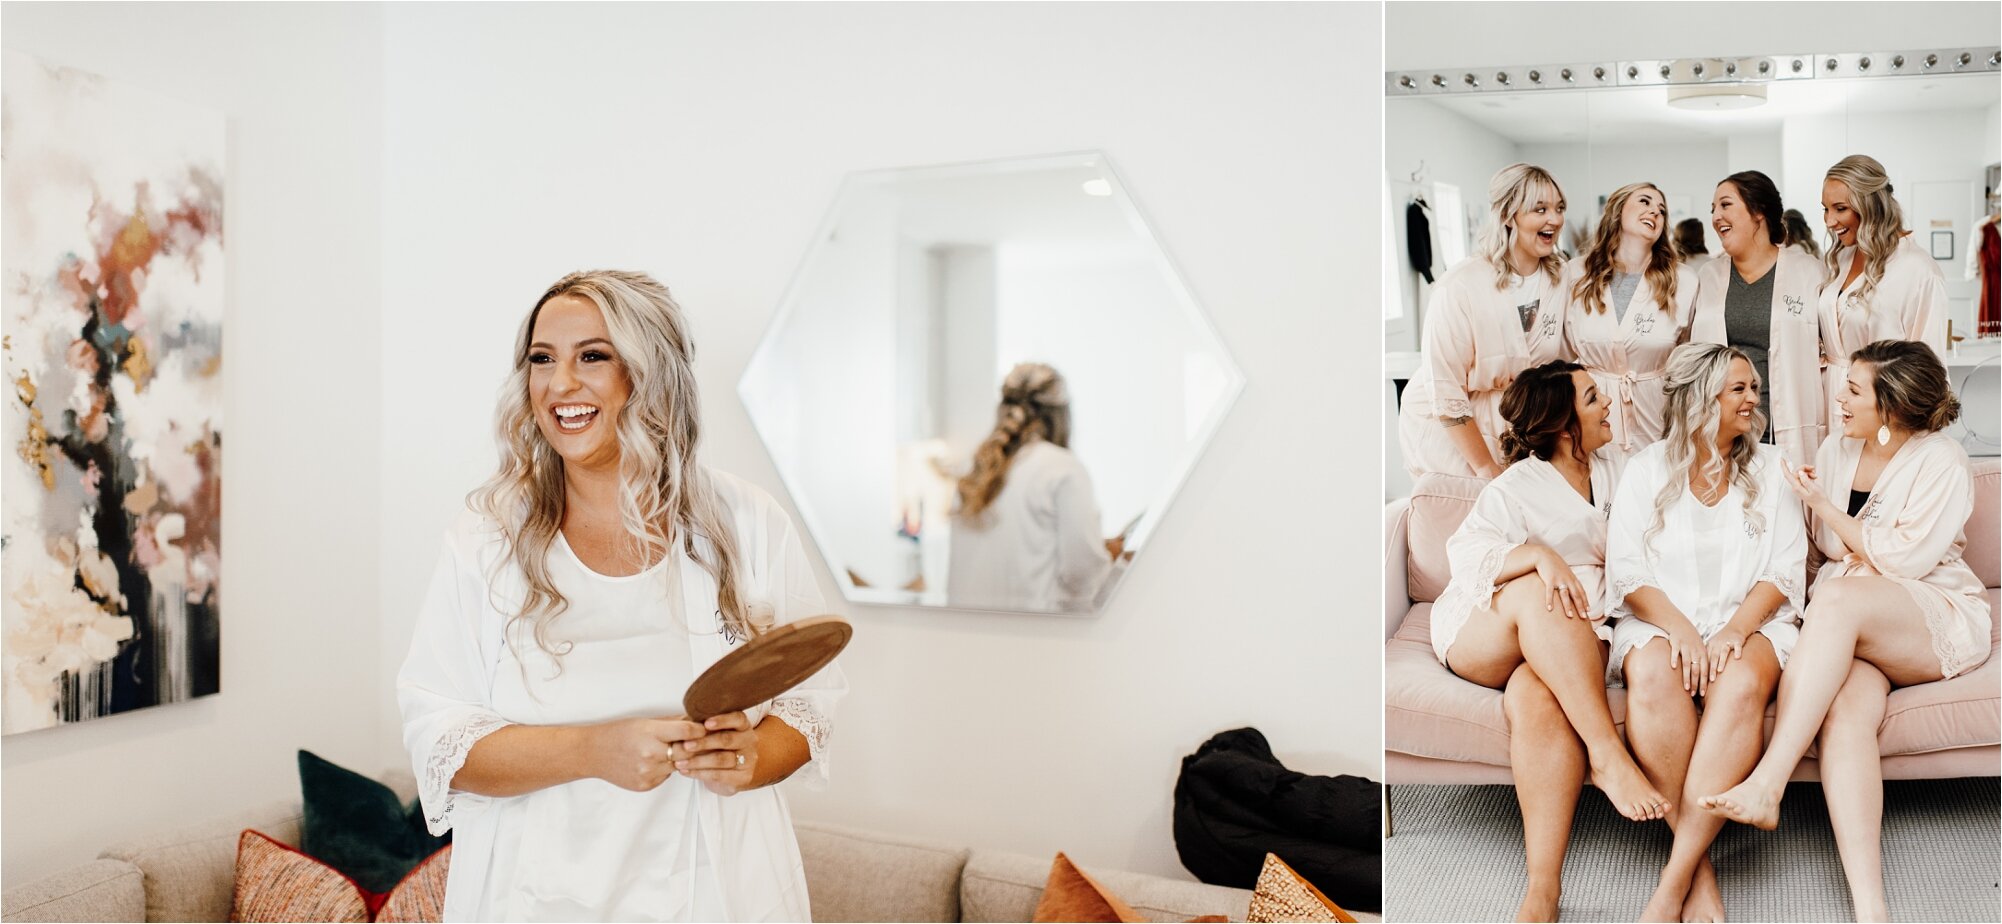  bride getting ready on her wedding day with bridesmaids in robes 